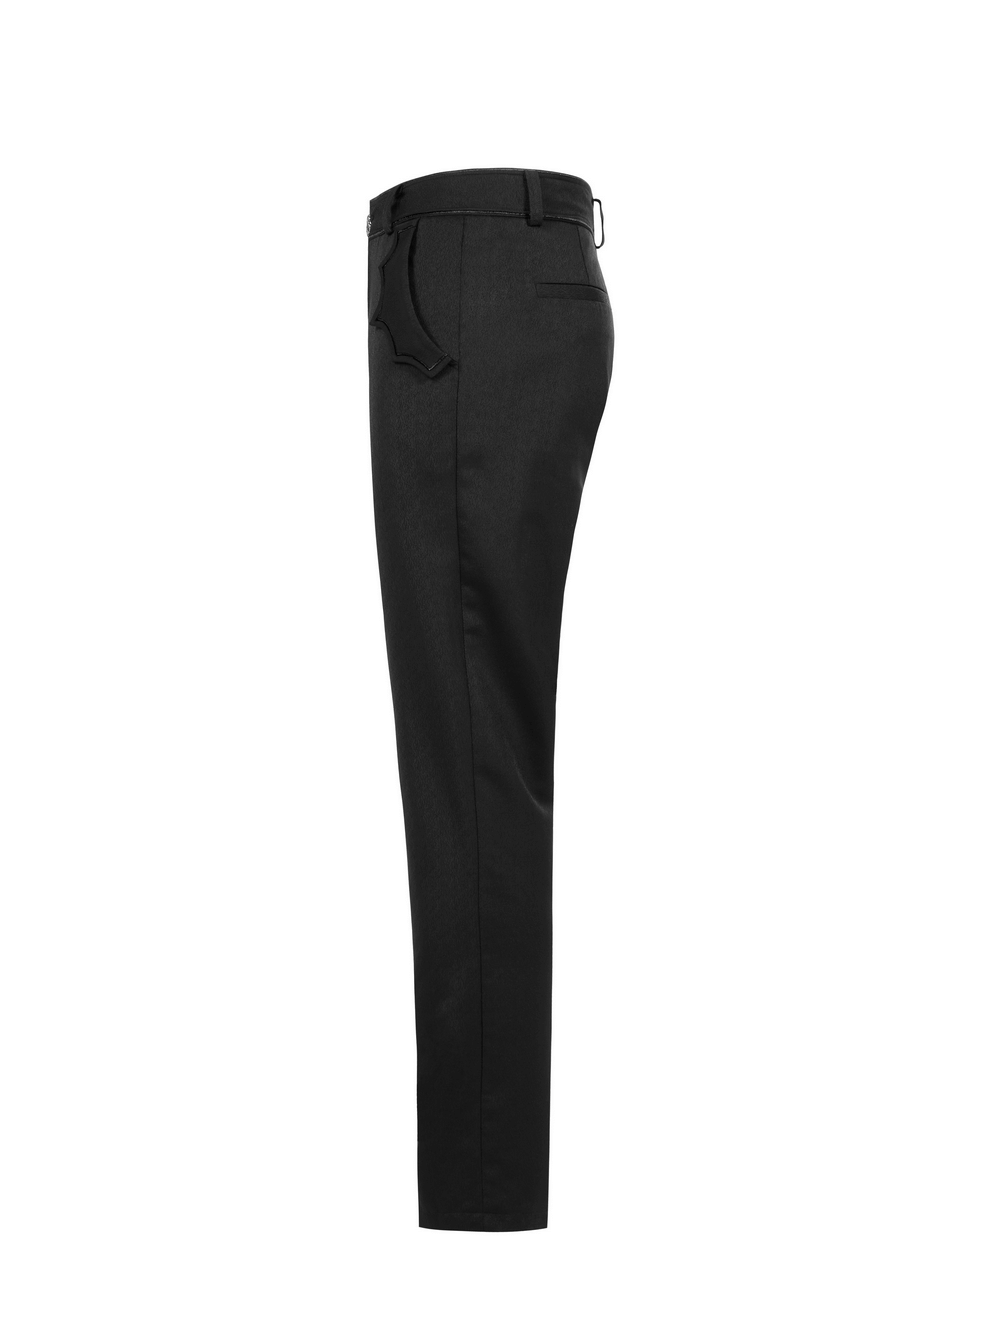 Men's Tailored Gothic Trousers with Bat Accents